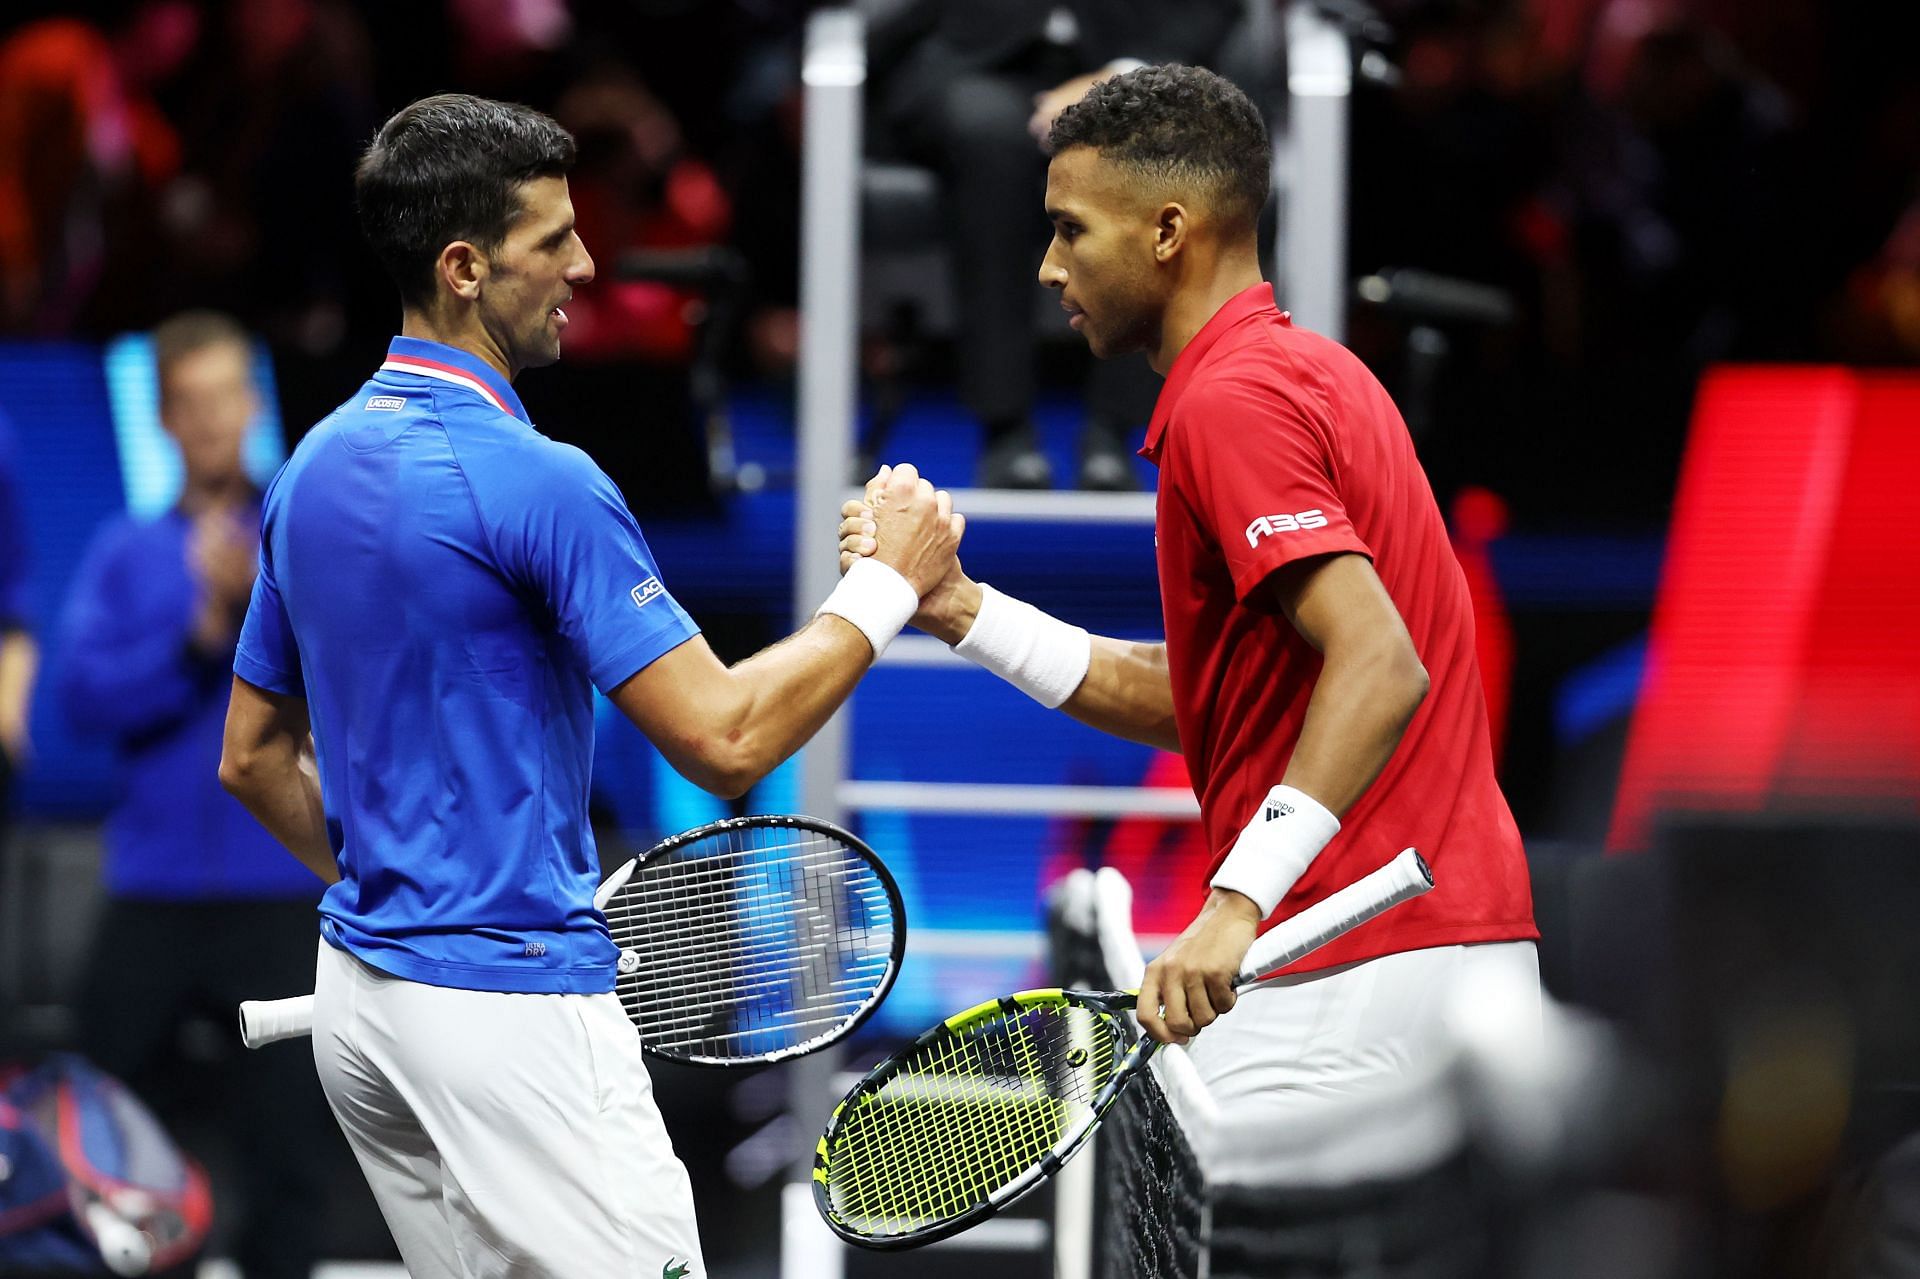 Novak Djokovic (left) and Felix Auger-Aliassime clashed at the Laver Cup this year.